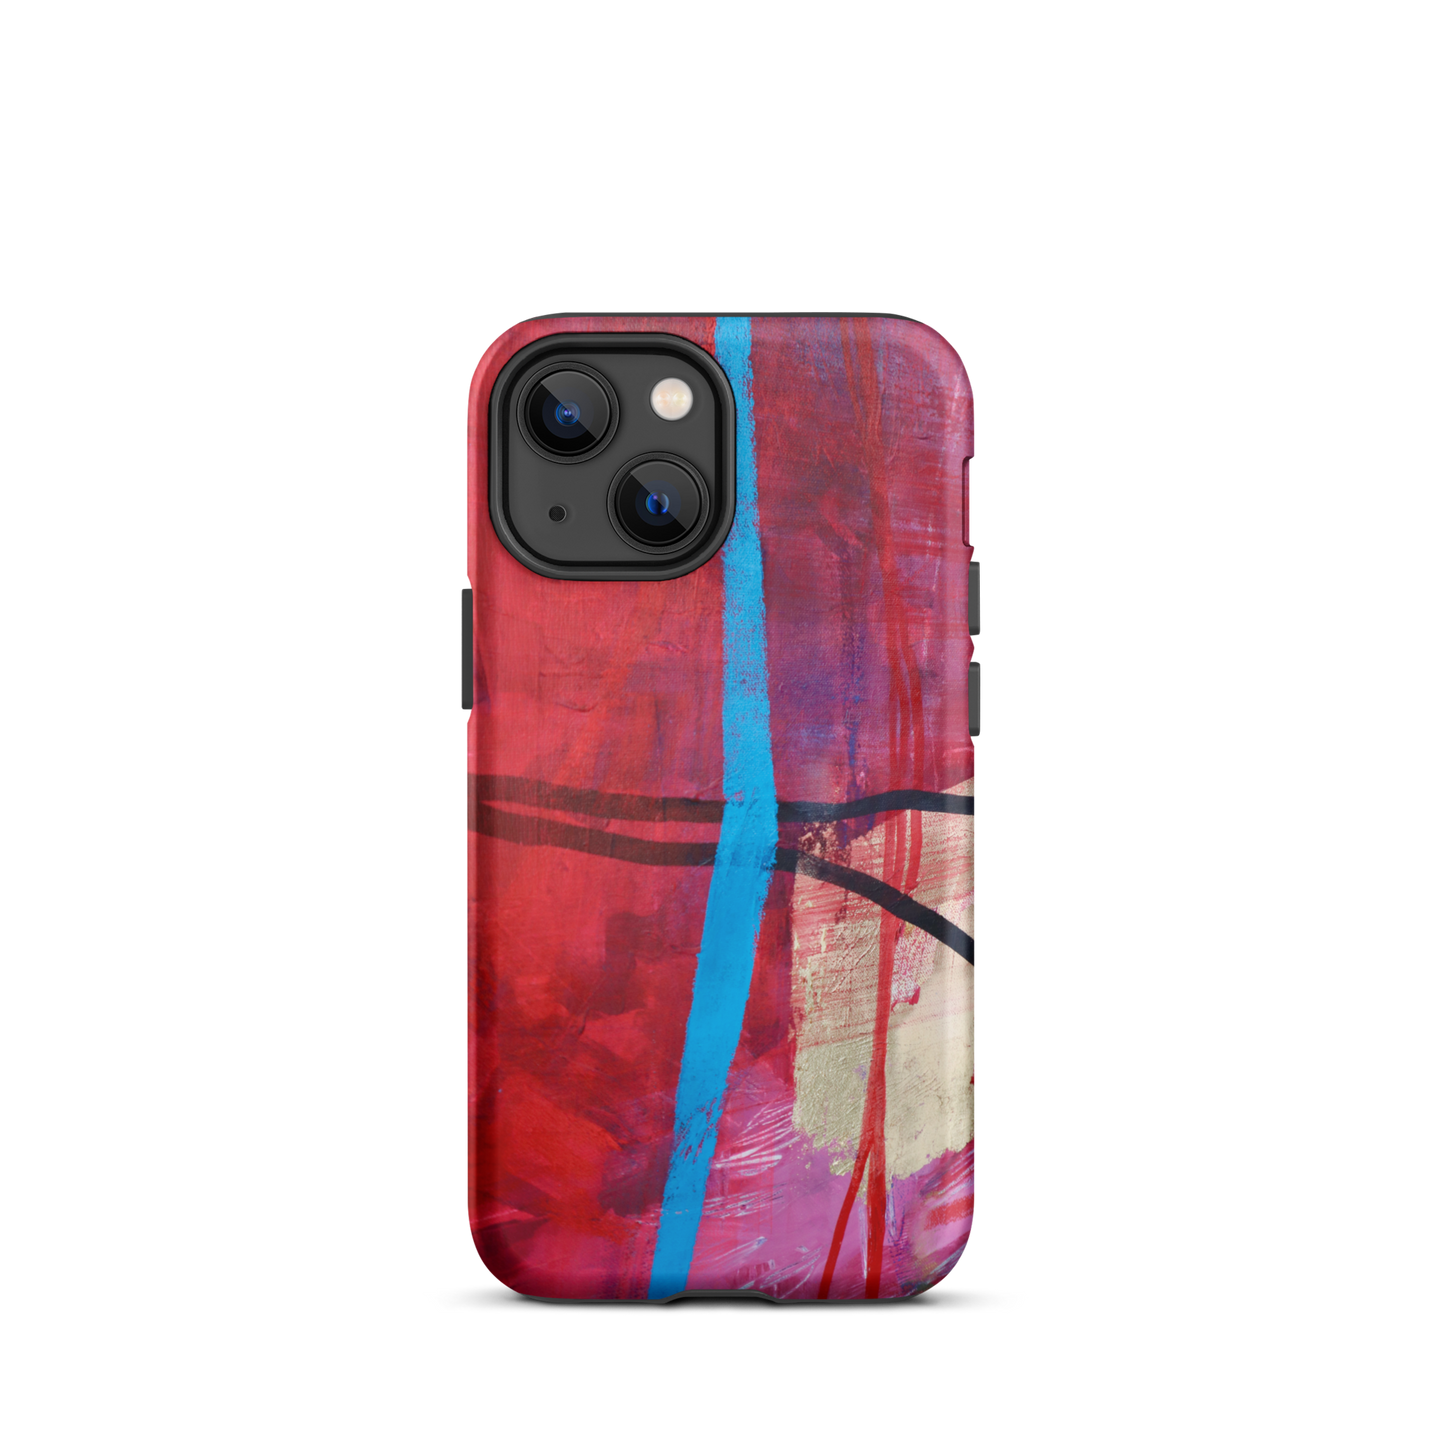 Energy Doesn't Lie - Tough iPhone case